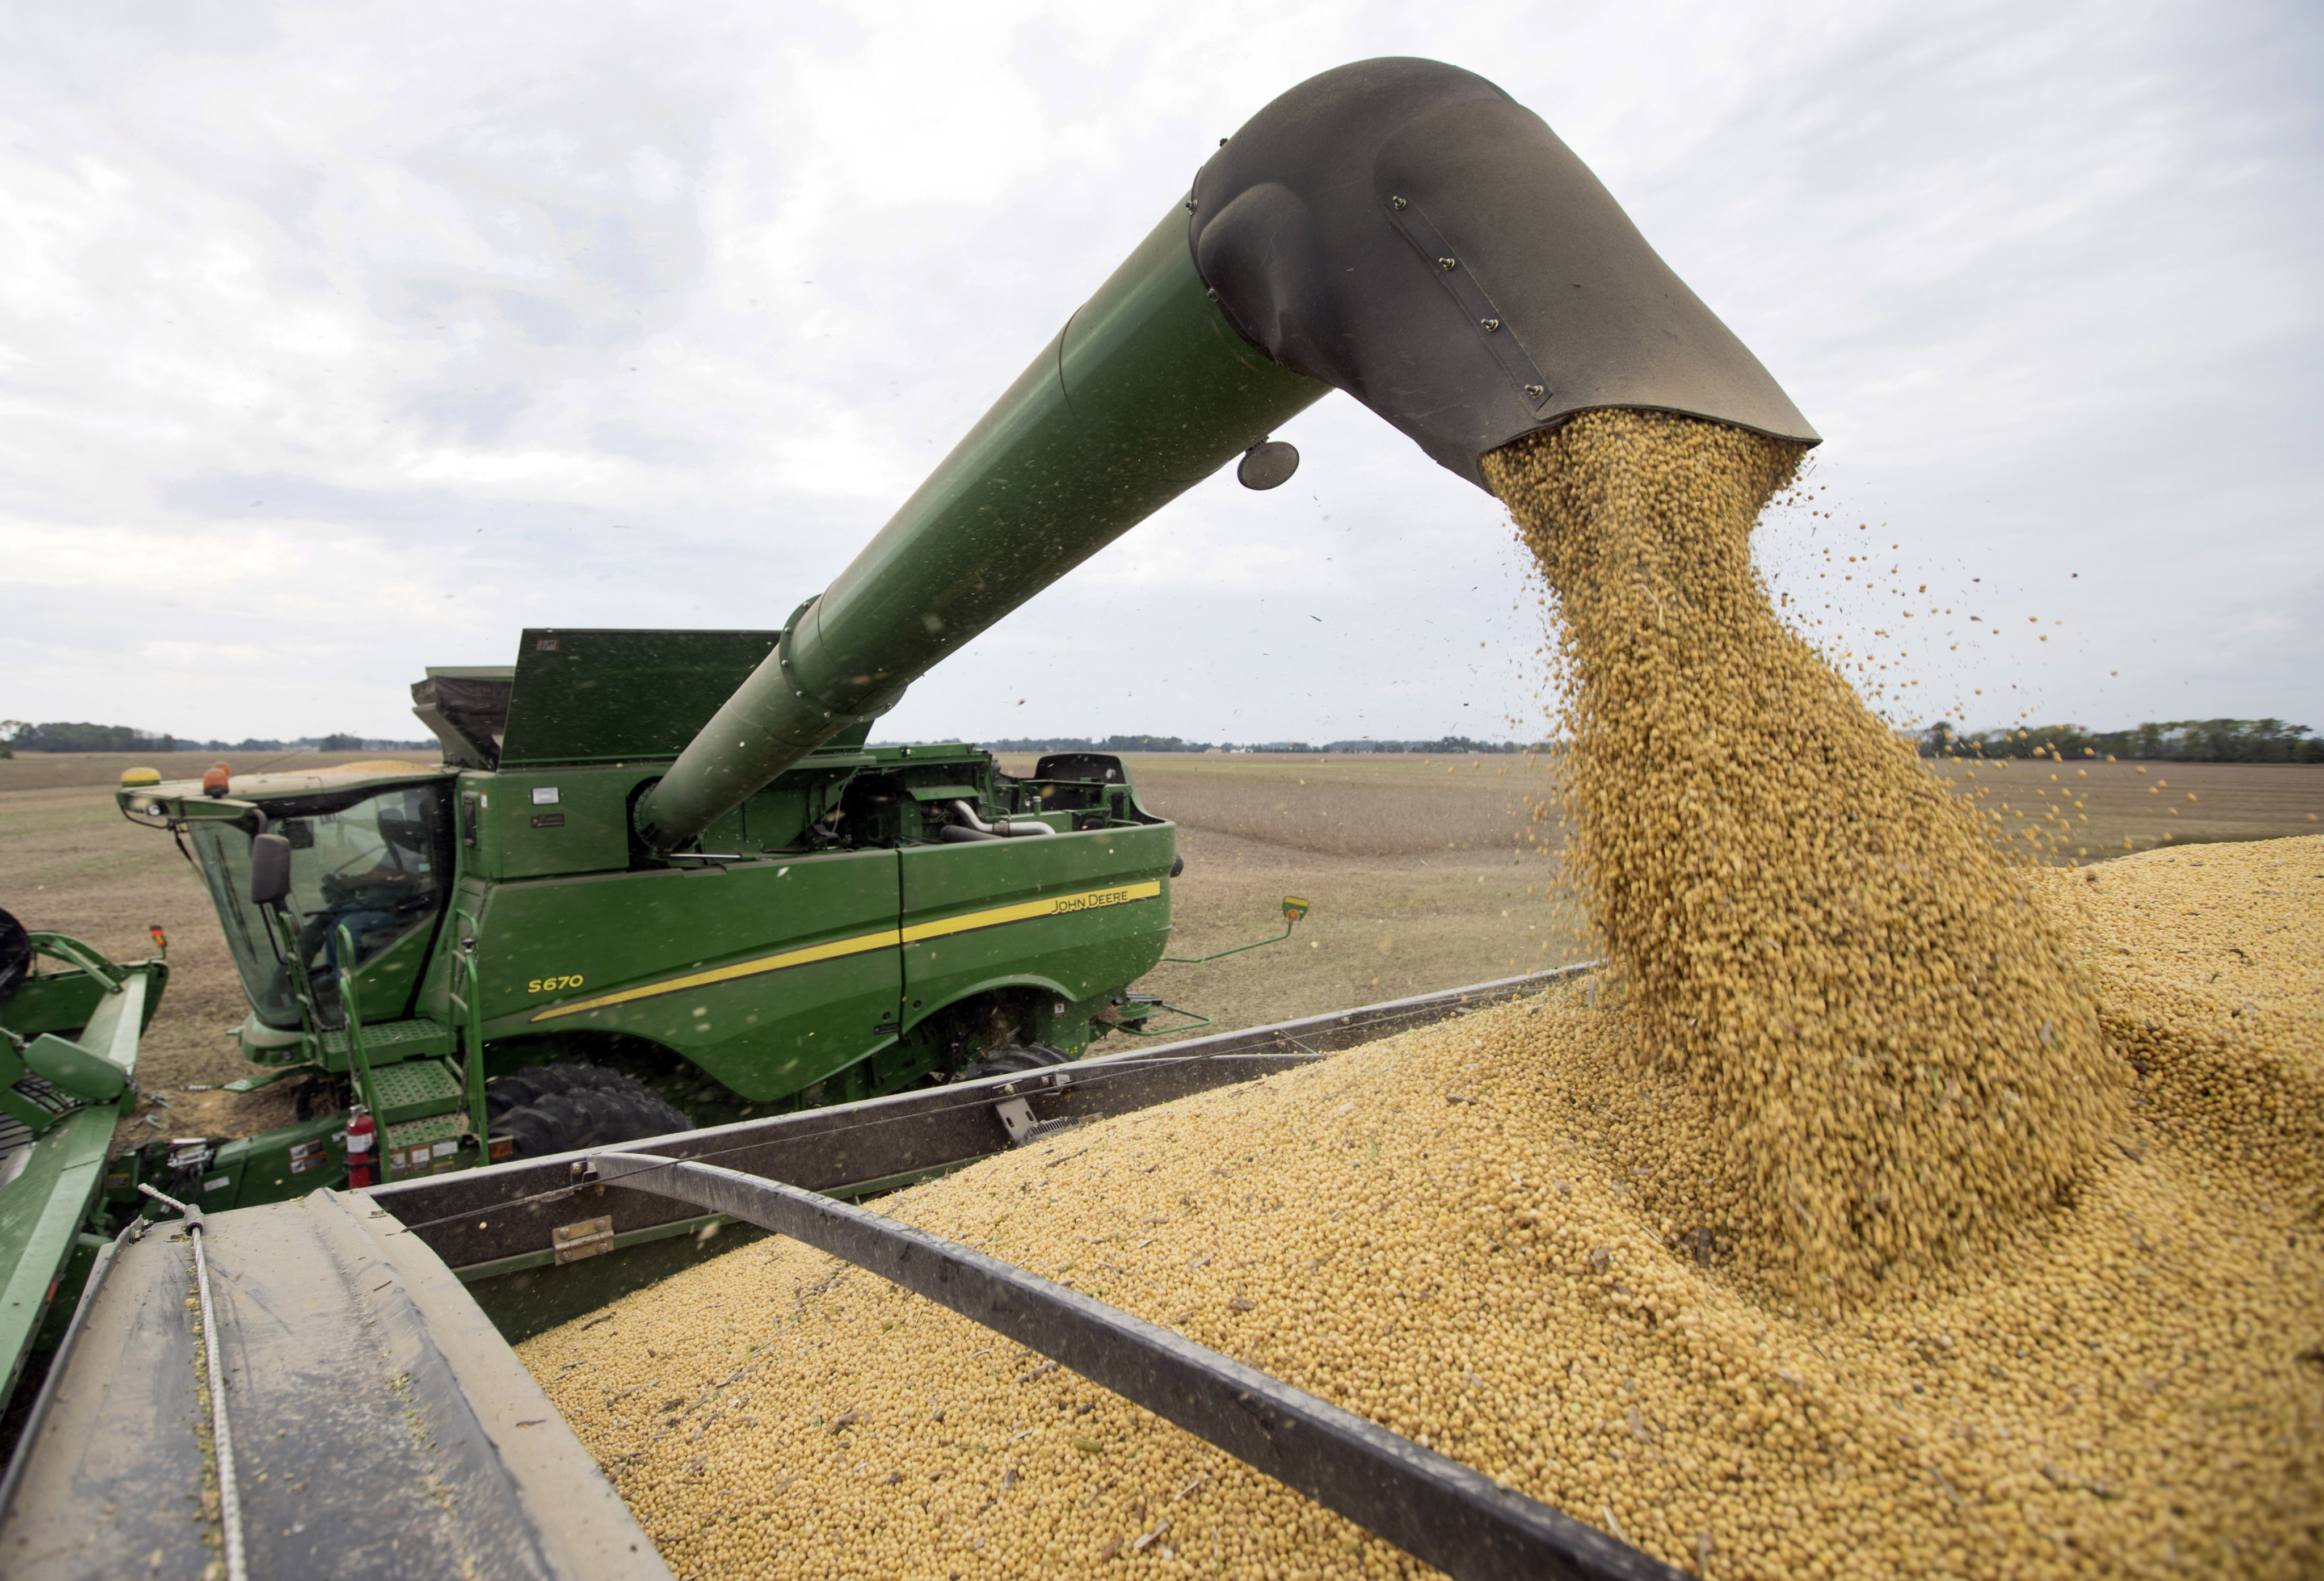 China imports more than 100 million tonnes of soybeans a year, and the United States is the biggest supplier. Photo: AP